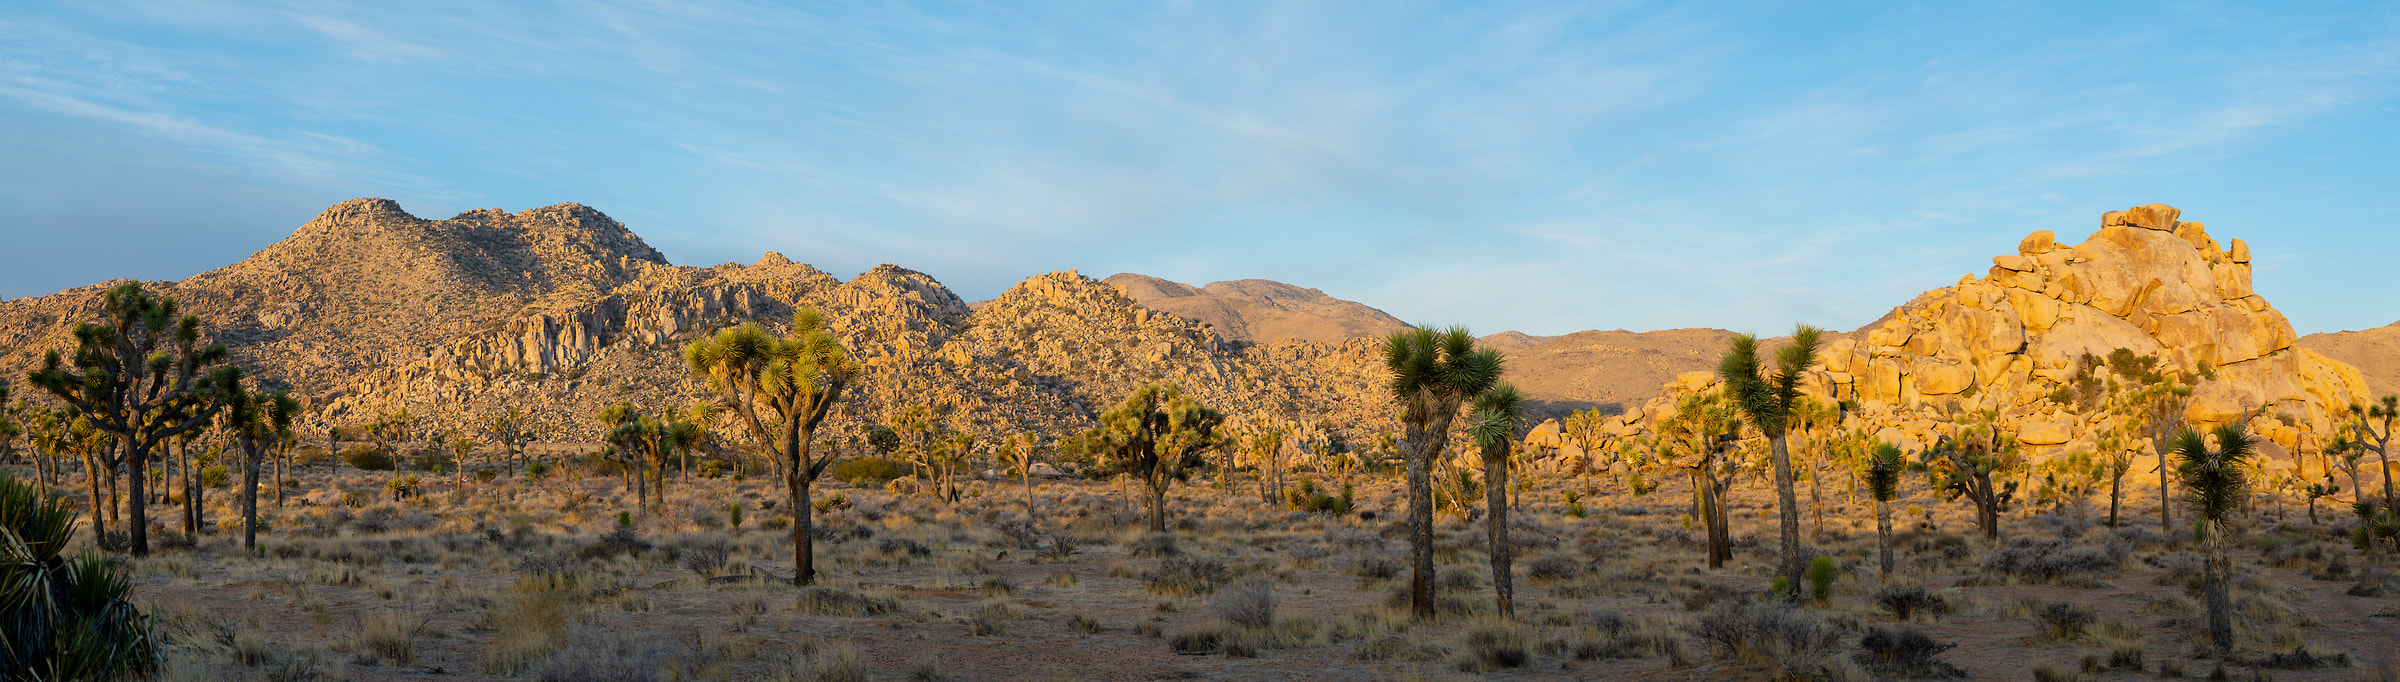 419 megapixels! A very high resolution, large-format VAST photo print of Joshua Tree National Park; landscape photograph created by Greg Probst in California.